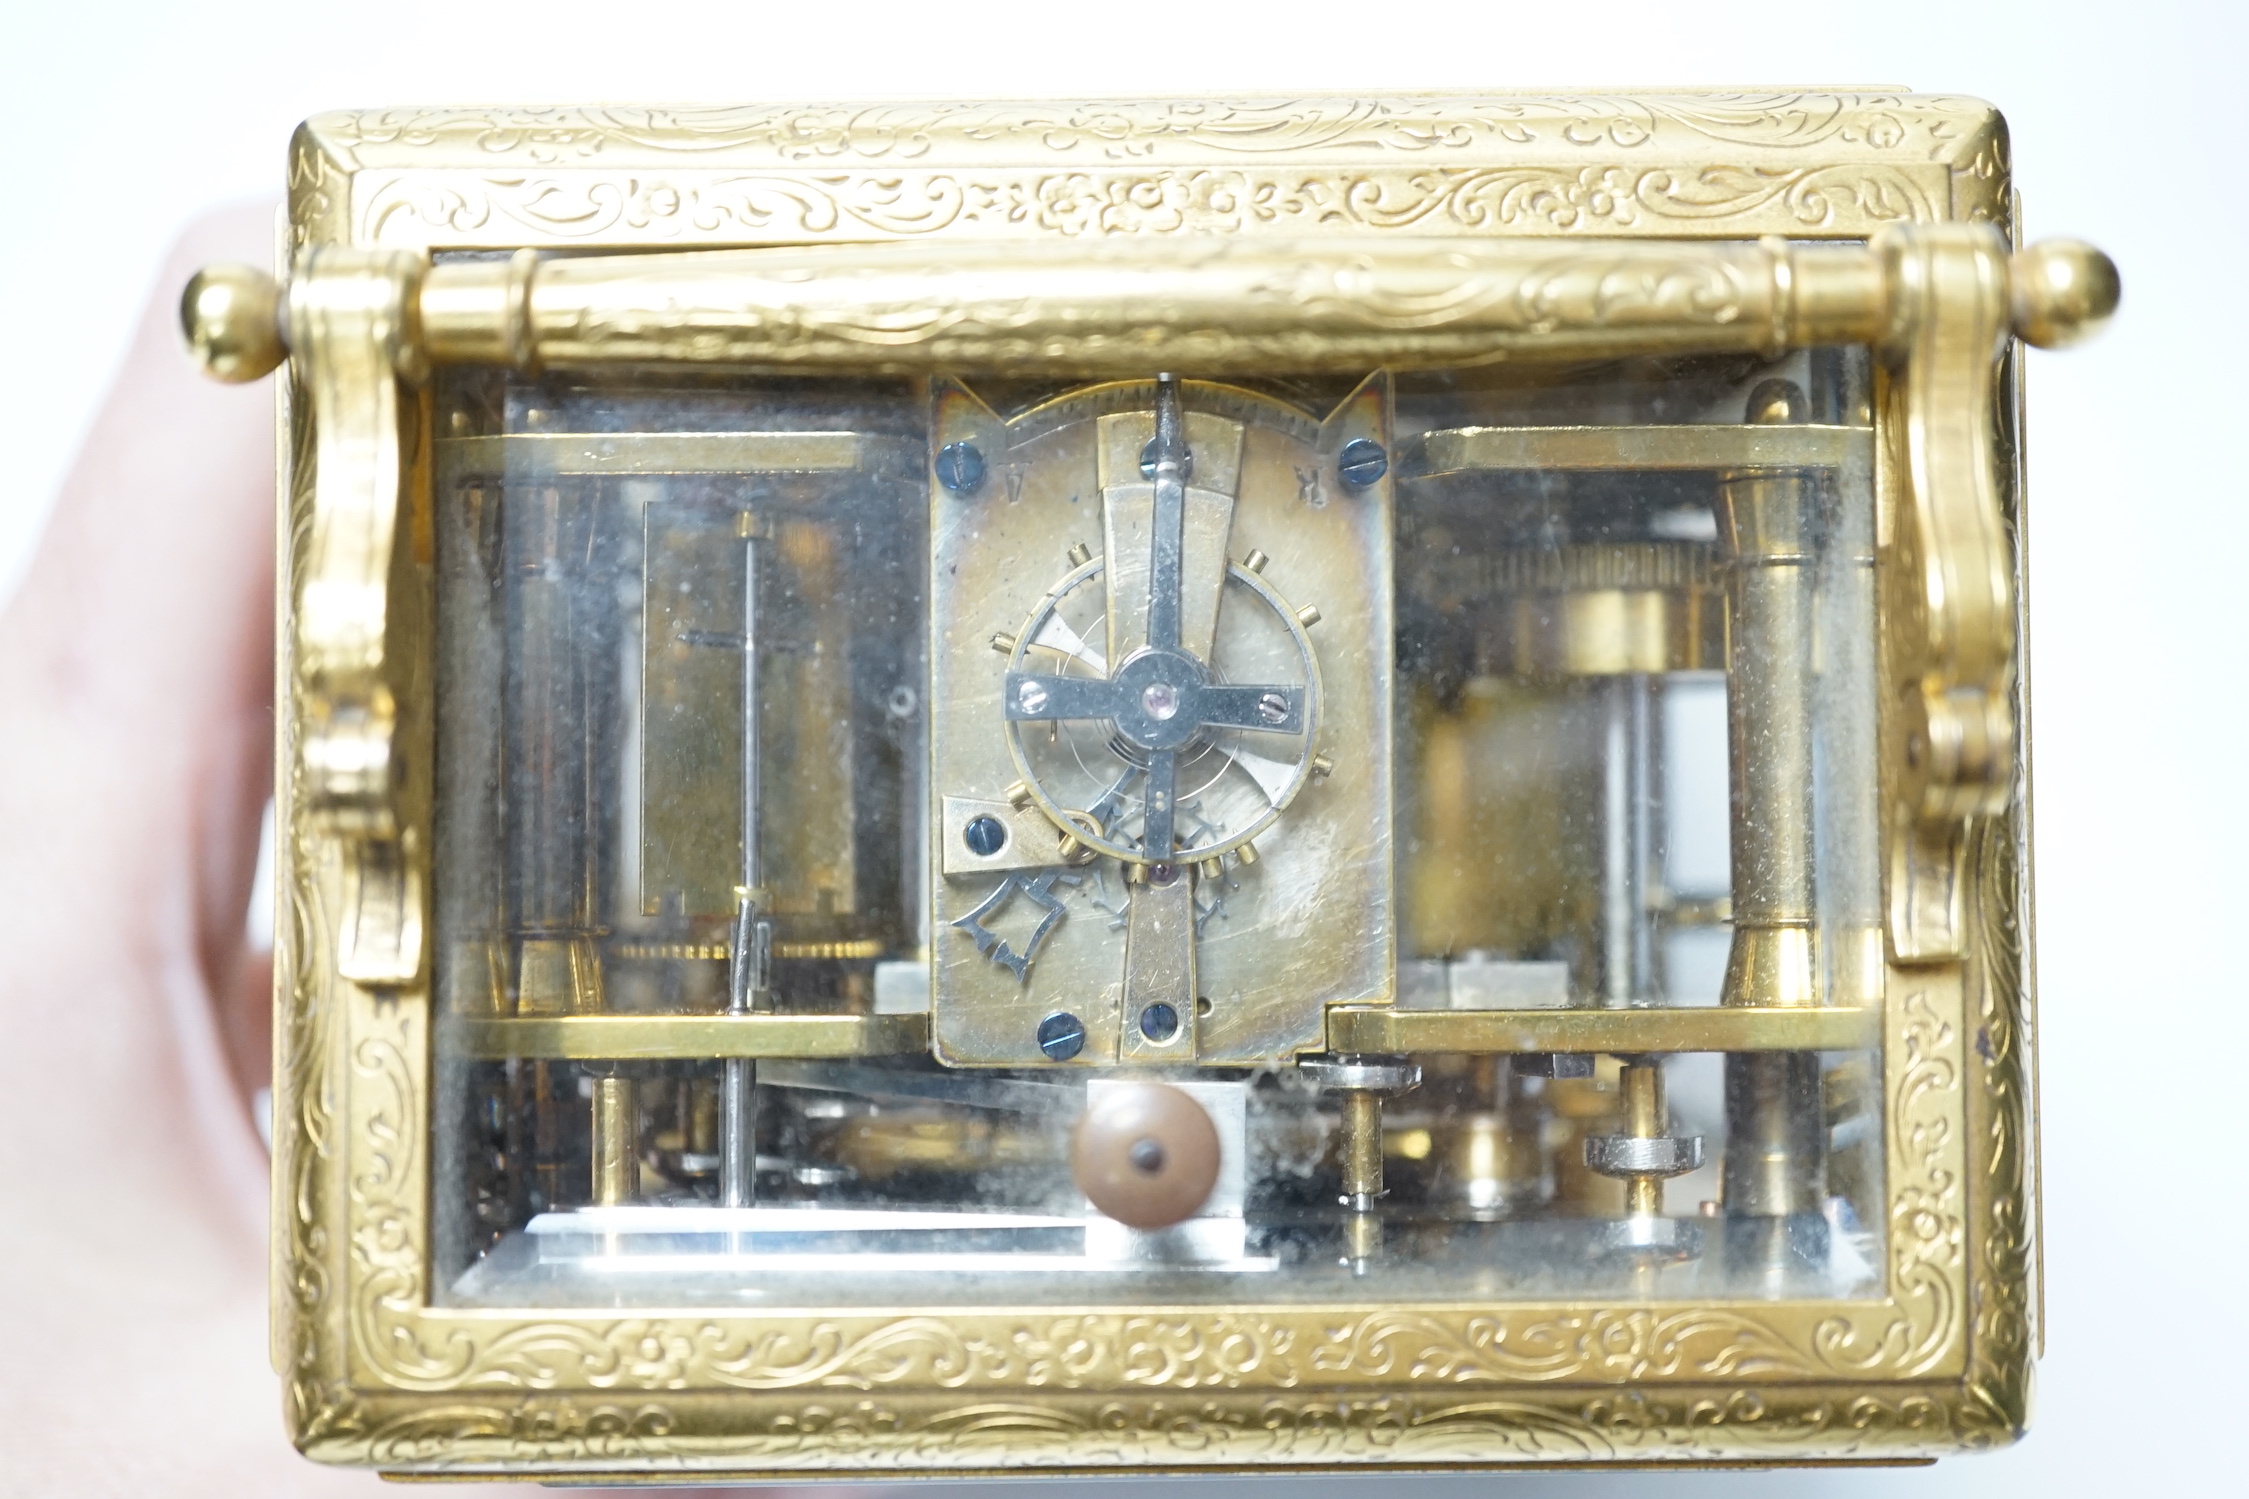 An ornate 19th century French repeating carriage clock with alarm, signed Dent a Paris, 13.5cm high